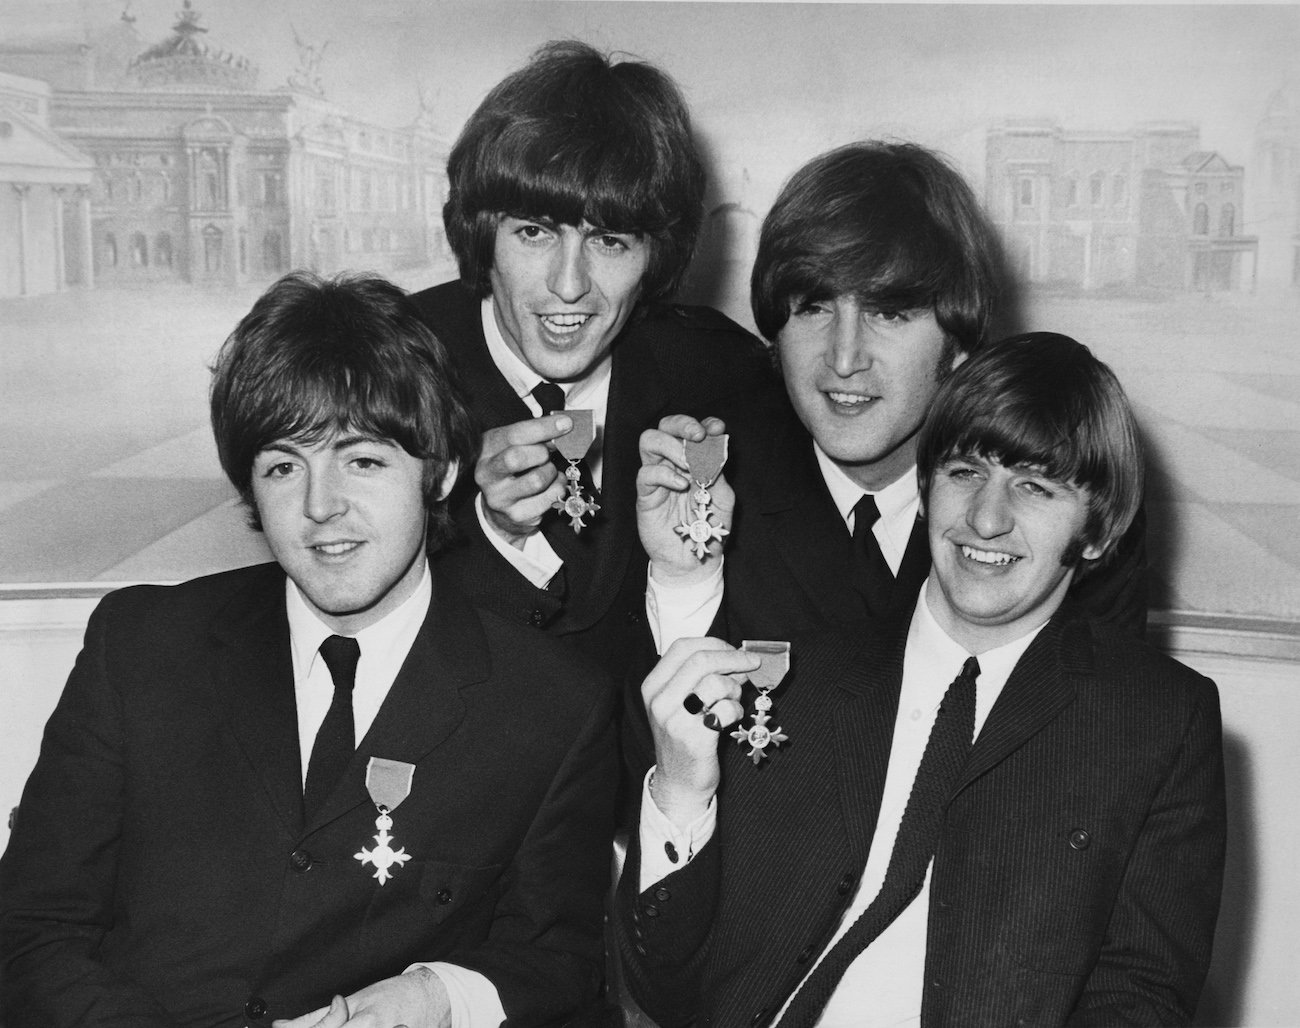 The Beatles holding their MBE awards, 1965.